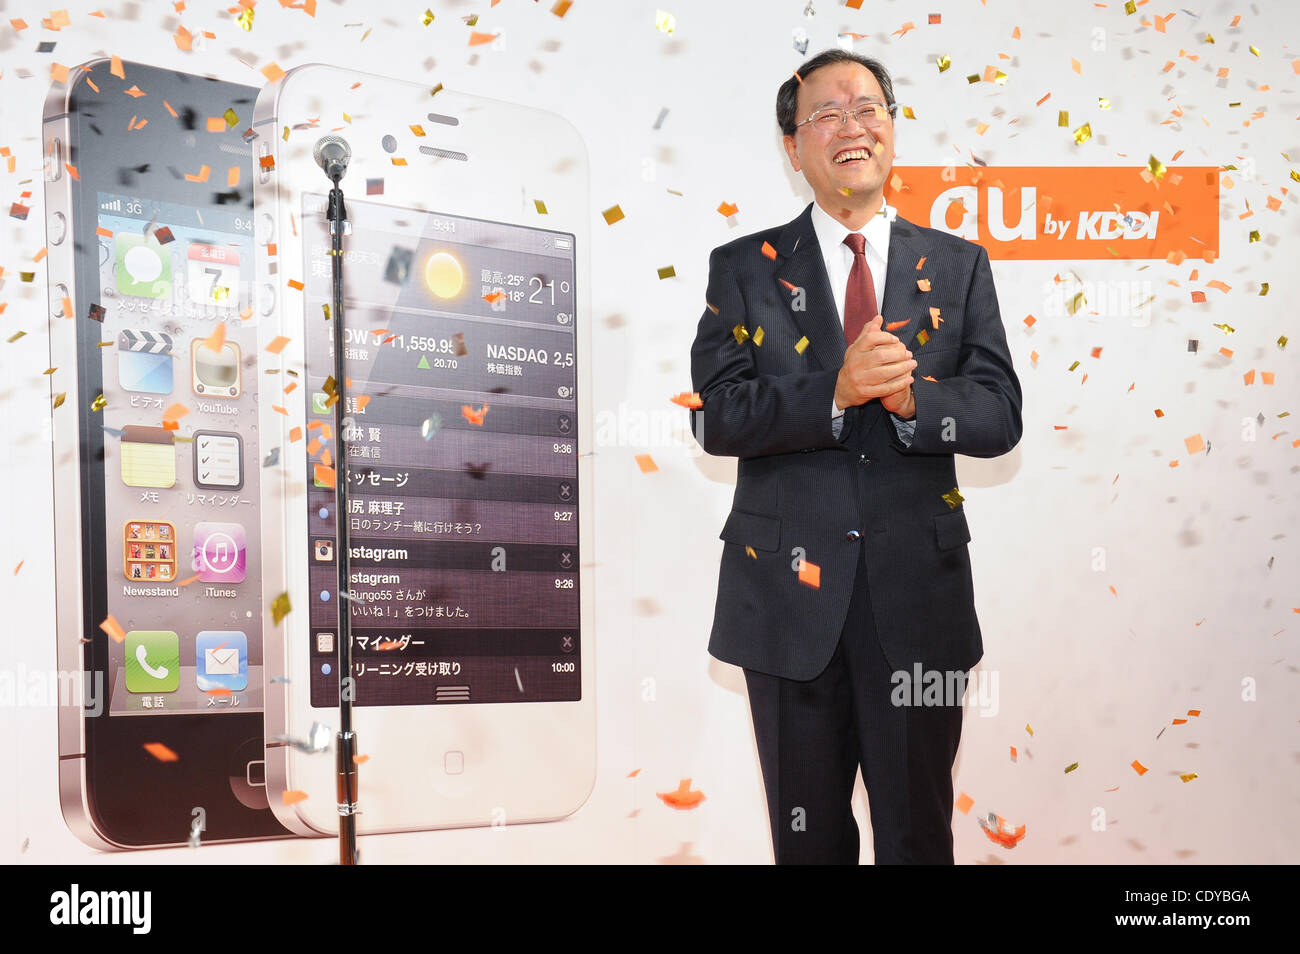 Oct. 14, 2011 - Tokyo, Japan - KDDI Corporation President TAKASHI TANAKA attends the launch event of the Apple Inc. iPhone 4S at the the KDDI's shop in Tokyo, Japan. iPhone 4S will be released simultaneously in 7 countries. iPhone 4S will be sold by Softbank and AU, 2 carriers for the first time in  Stock Photo